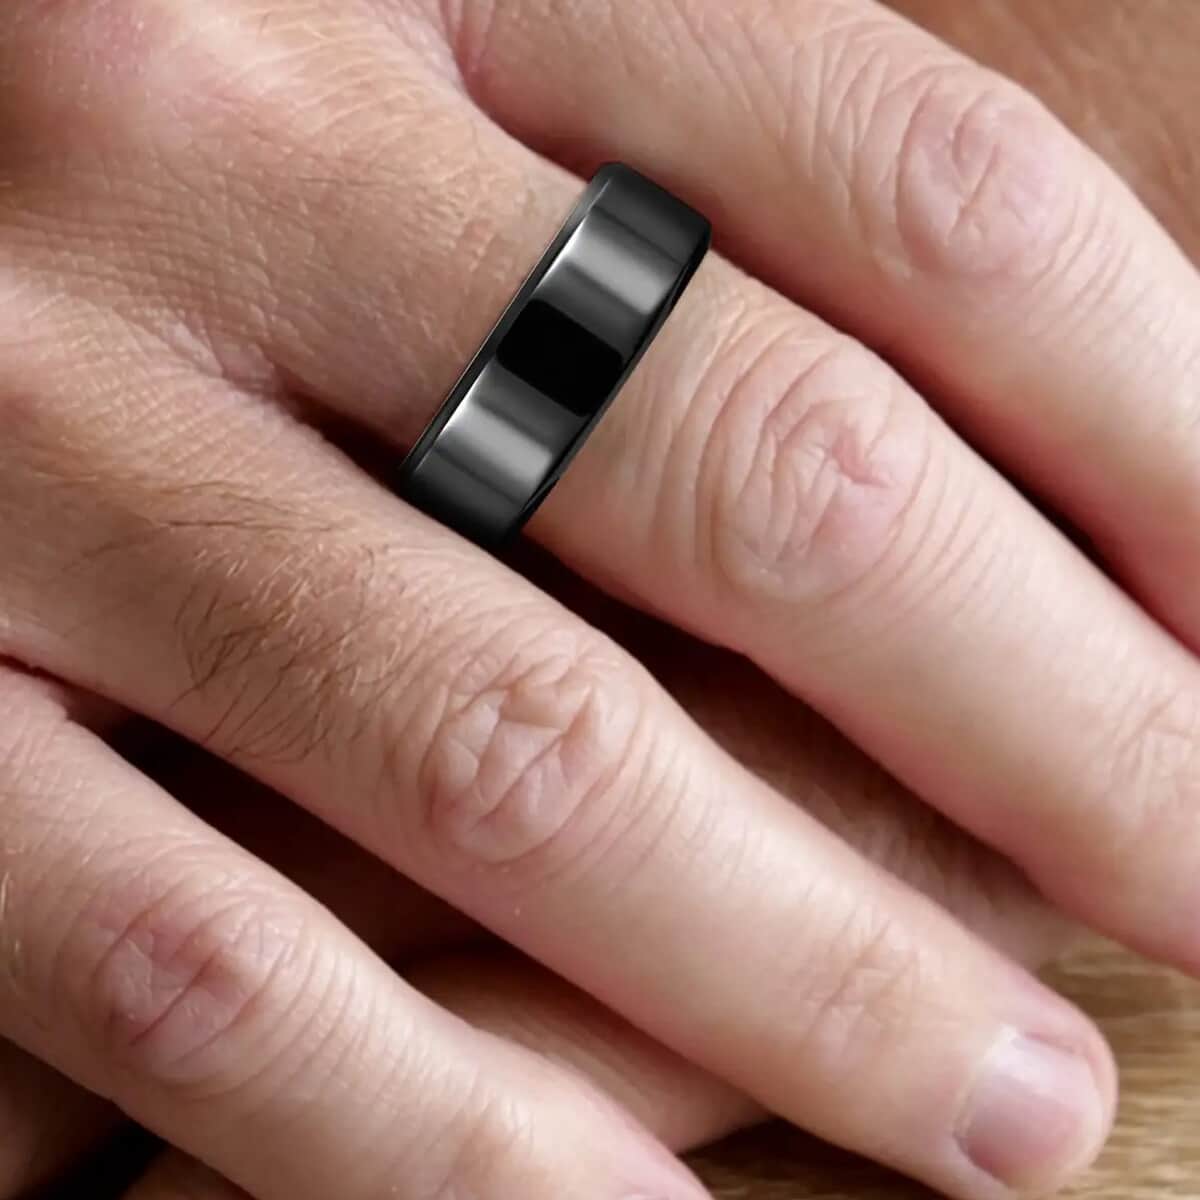 Soulsmart Multifunctional Health Tracker Smart Ring (Size 10.0) in ION Plated Black Stainless Steel (Compatible with Android 5.0+ & Apple IOS 10.0+ Systems) (Del. in 10-15 Days) image number 8